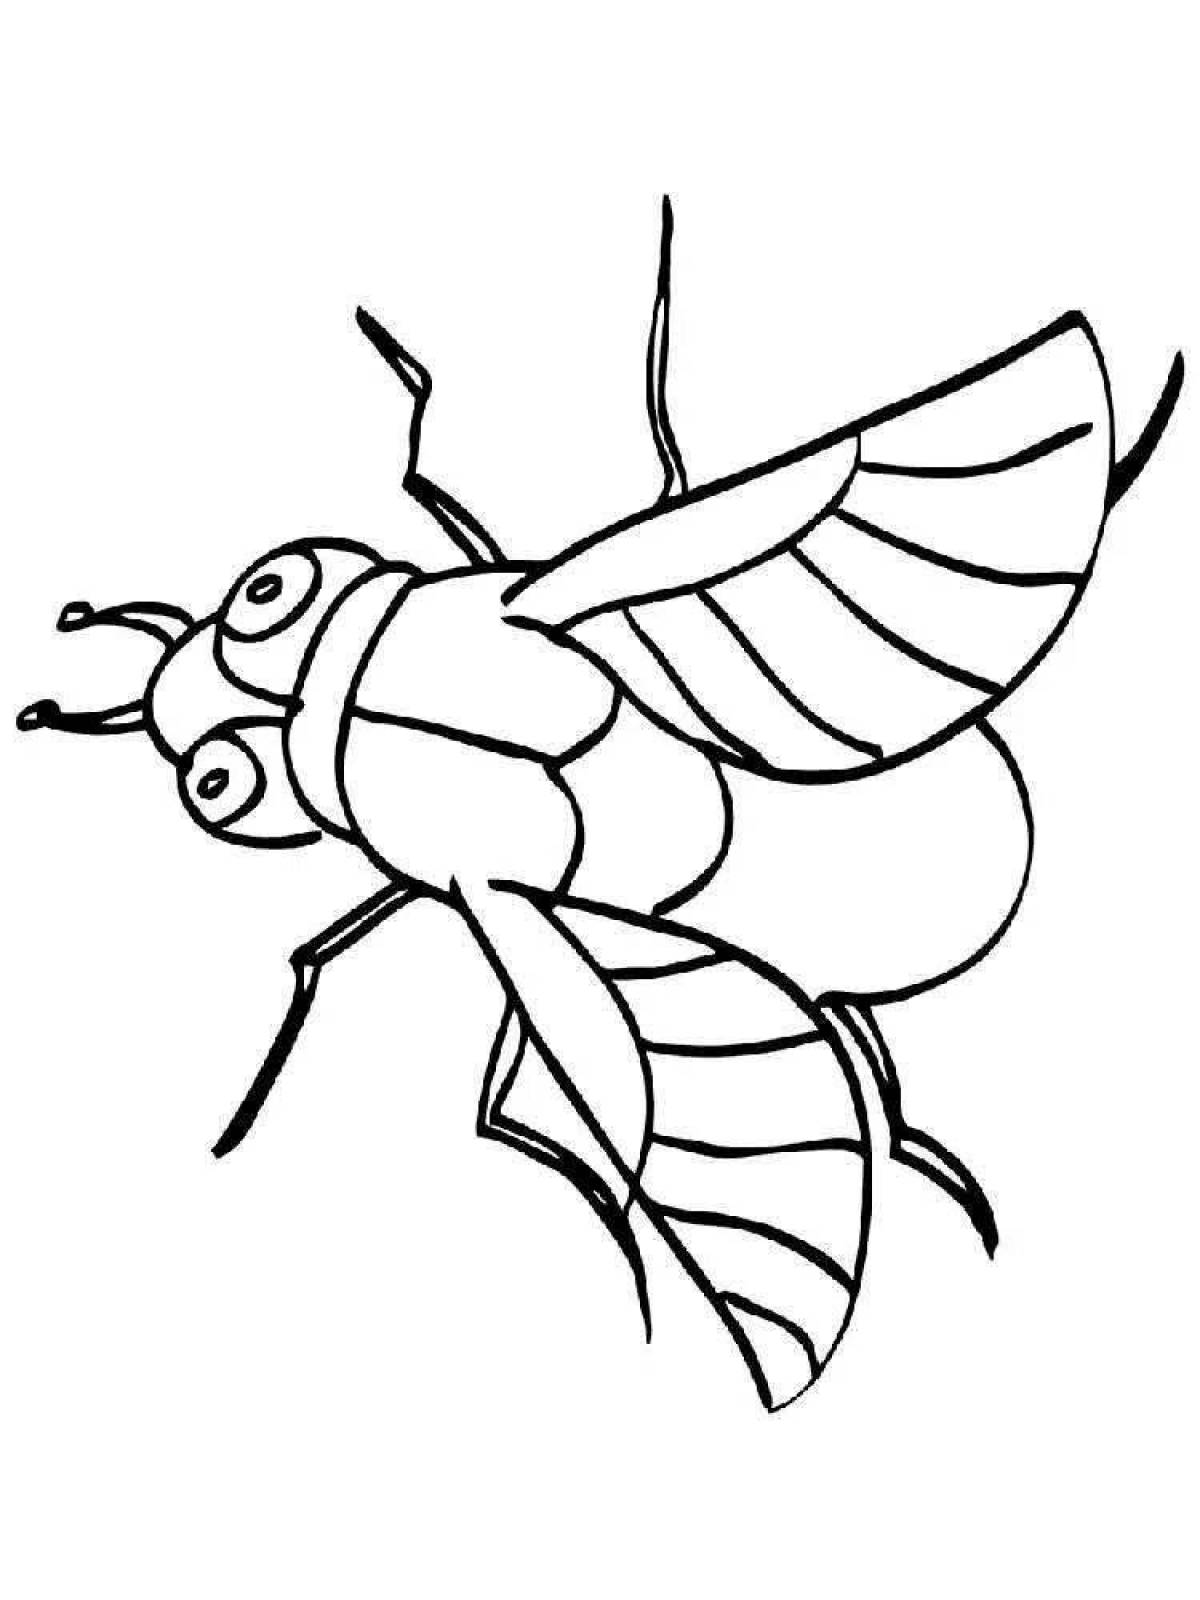 Attractive fly coloring book for kids